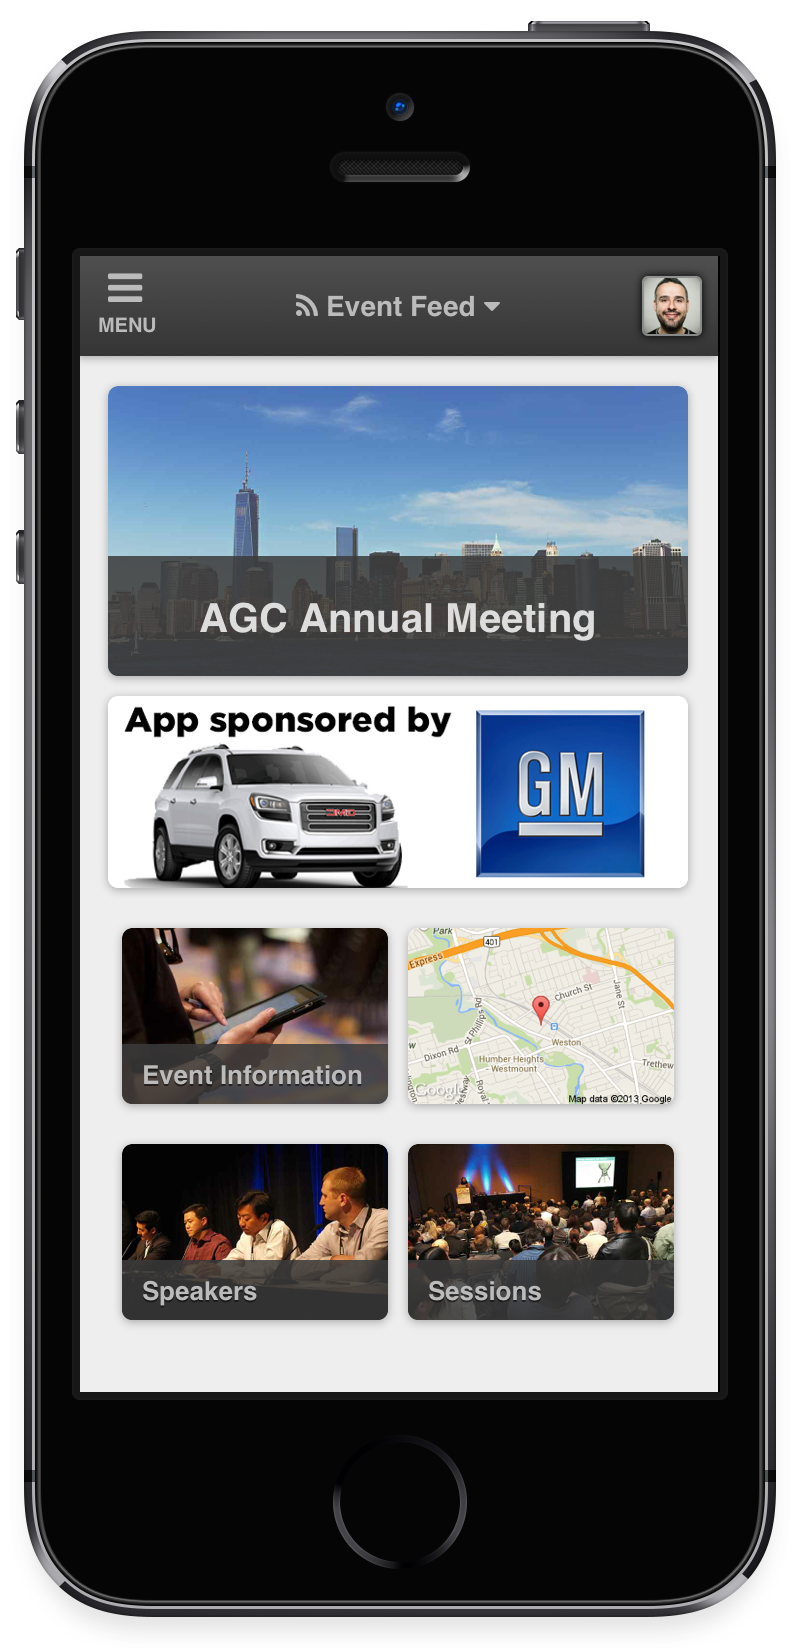 Example of event app sponsorship on an app on an iPhone